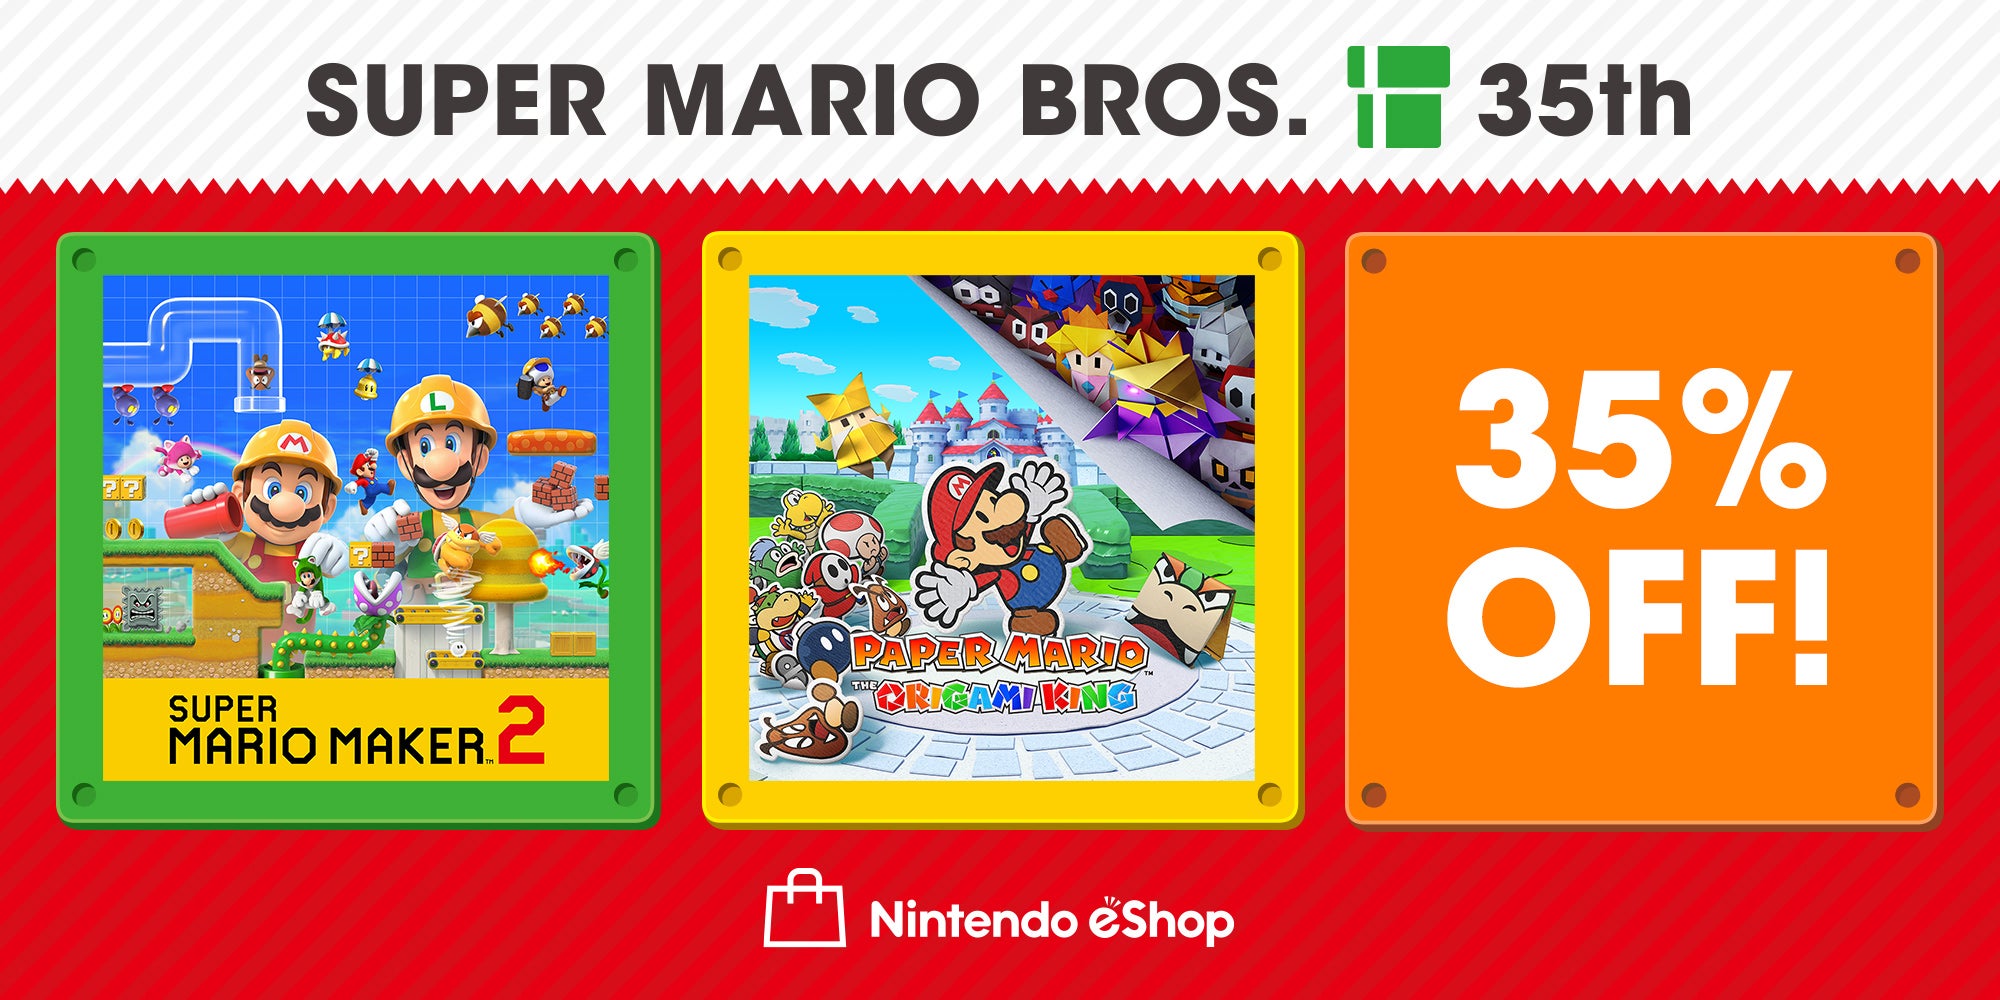 Image for Mario Maker 2 and Paper Mario: The Origami King are 35% off at the Nintendo eShop